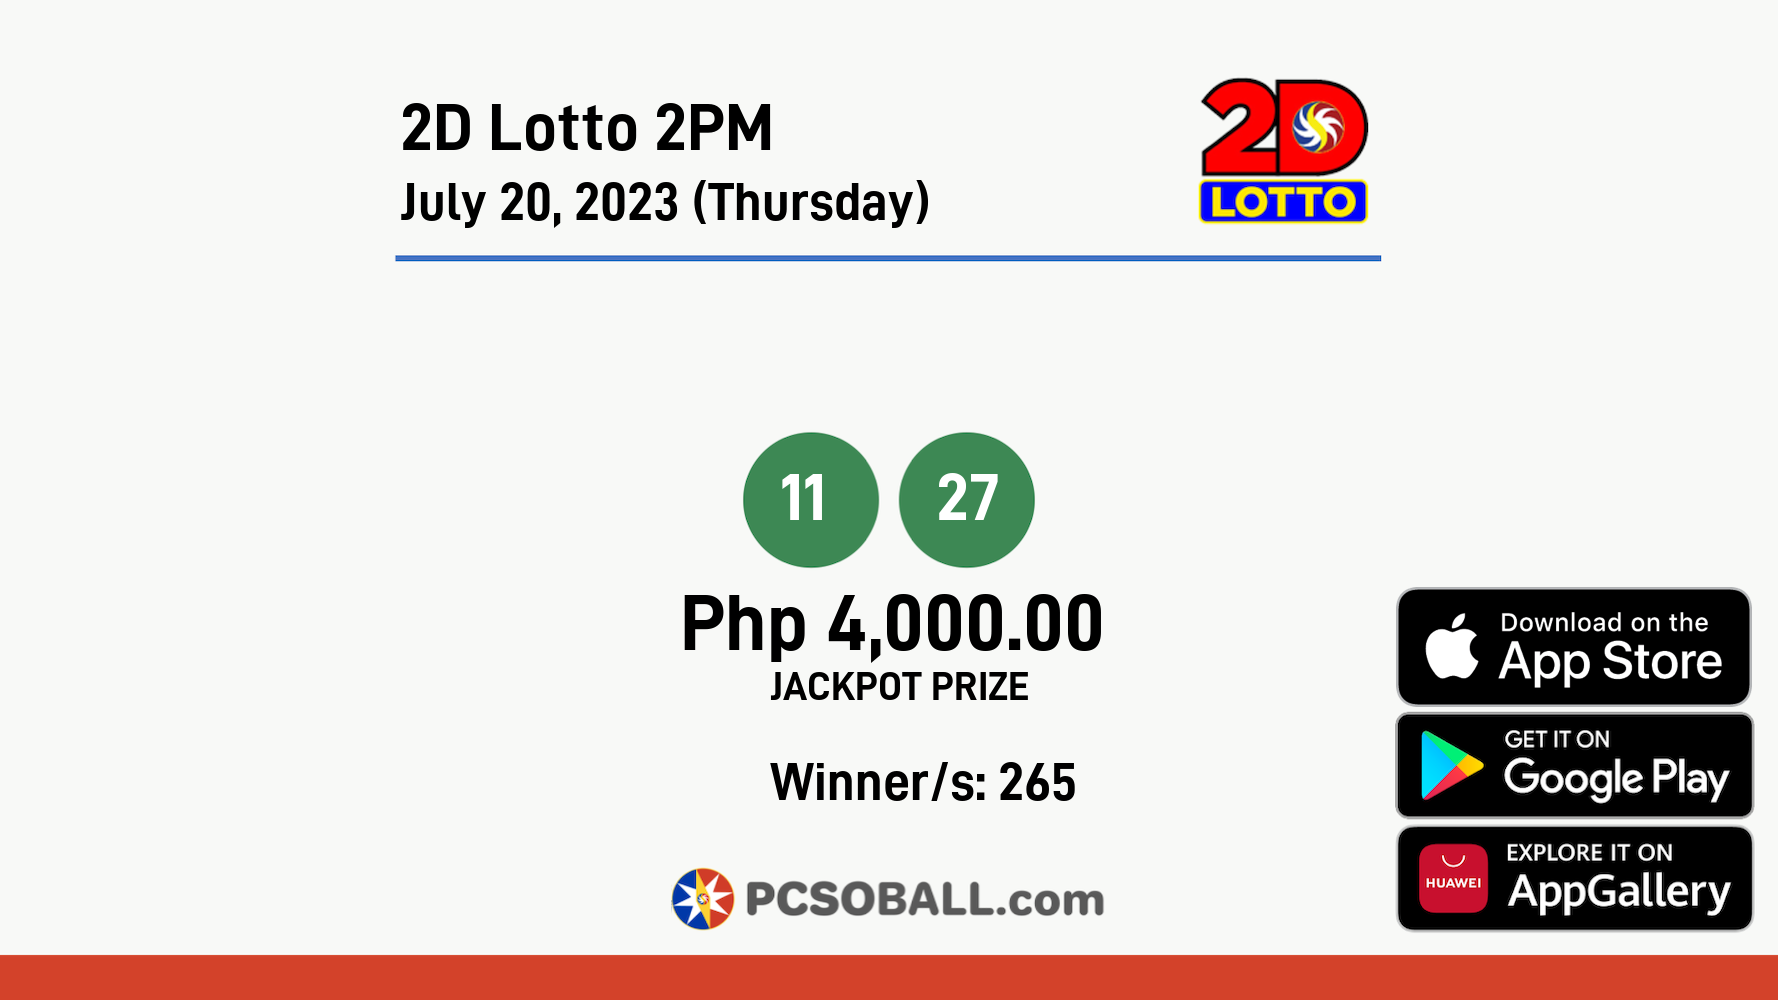 2D Lotto 2PM July 20, 2023 (Thursday) Result